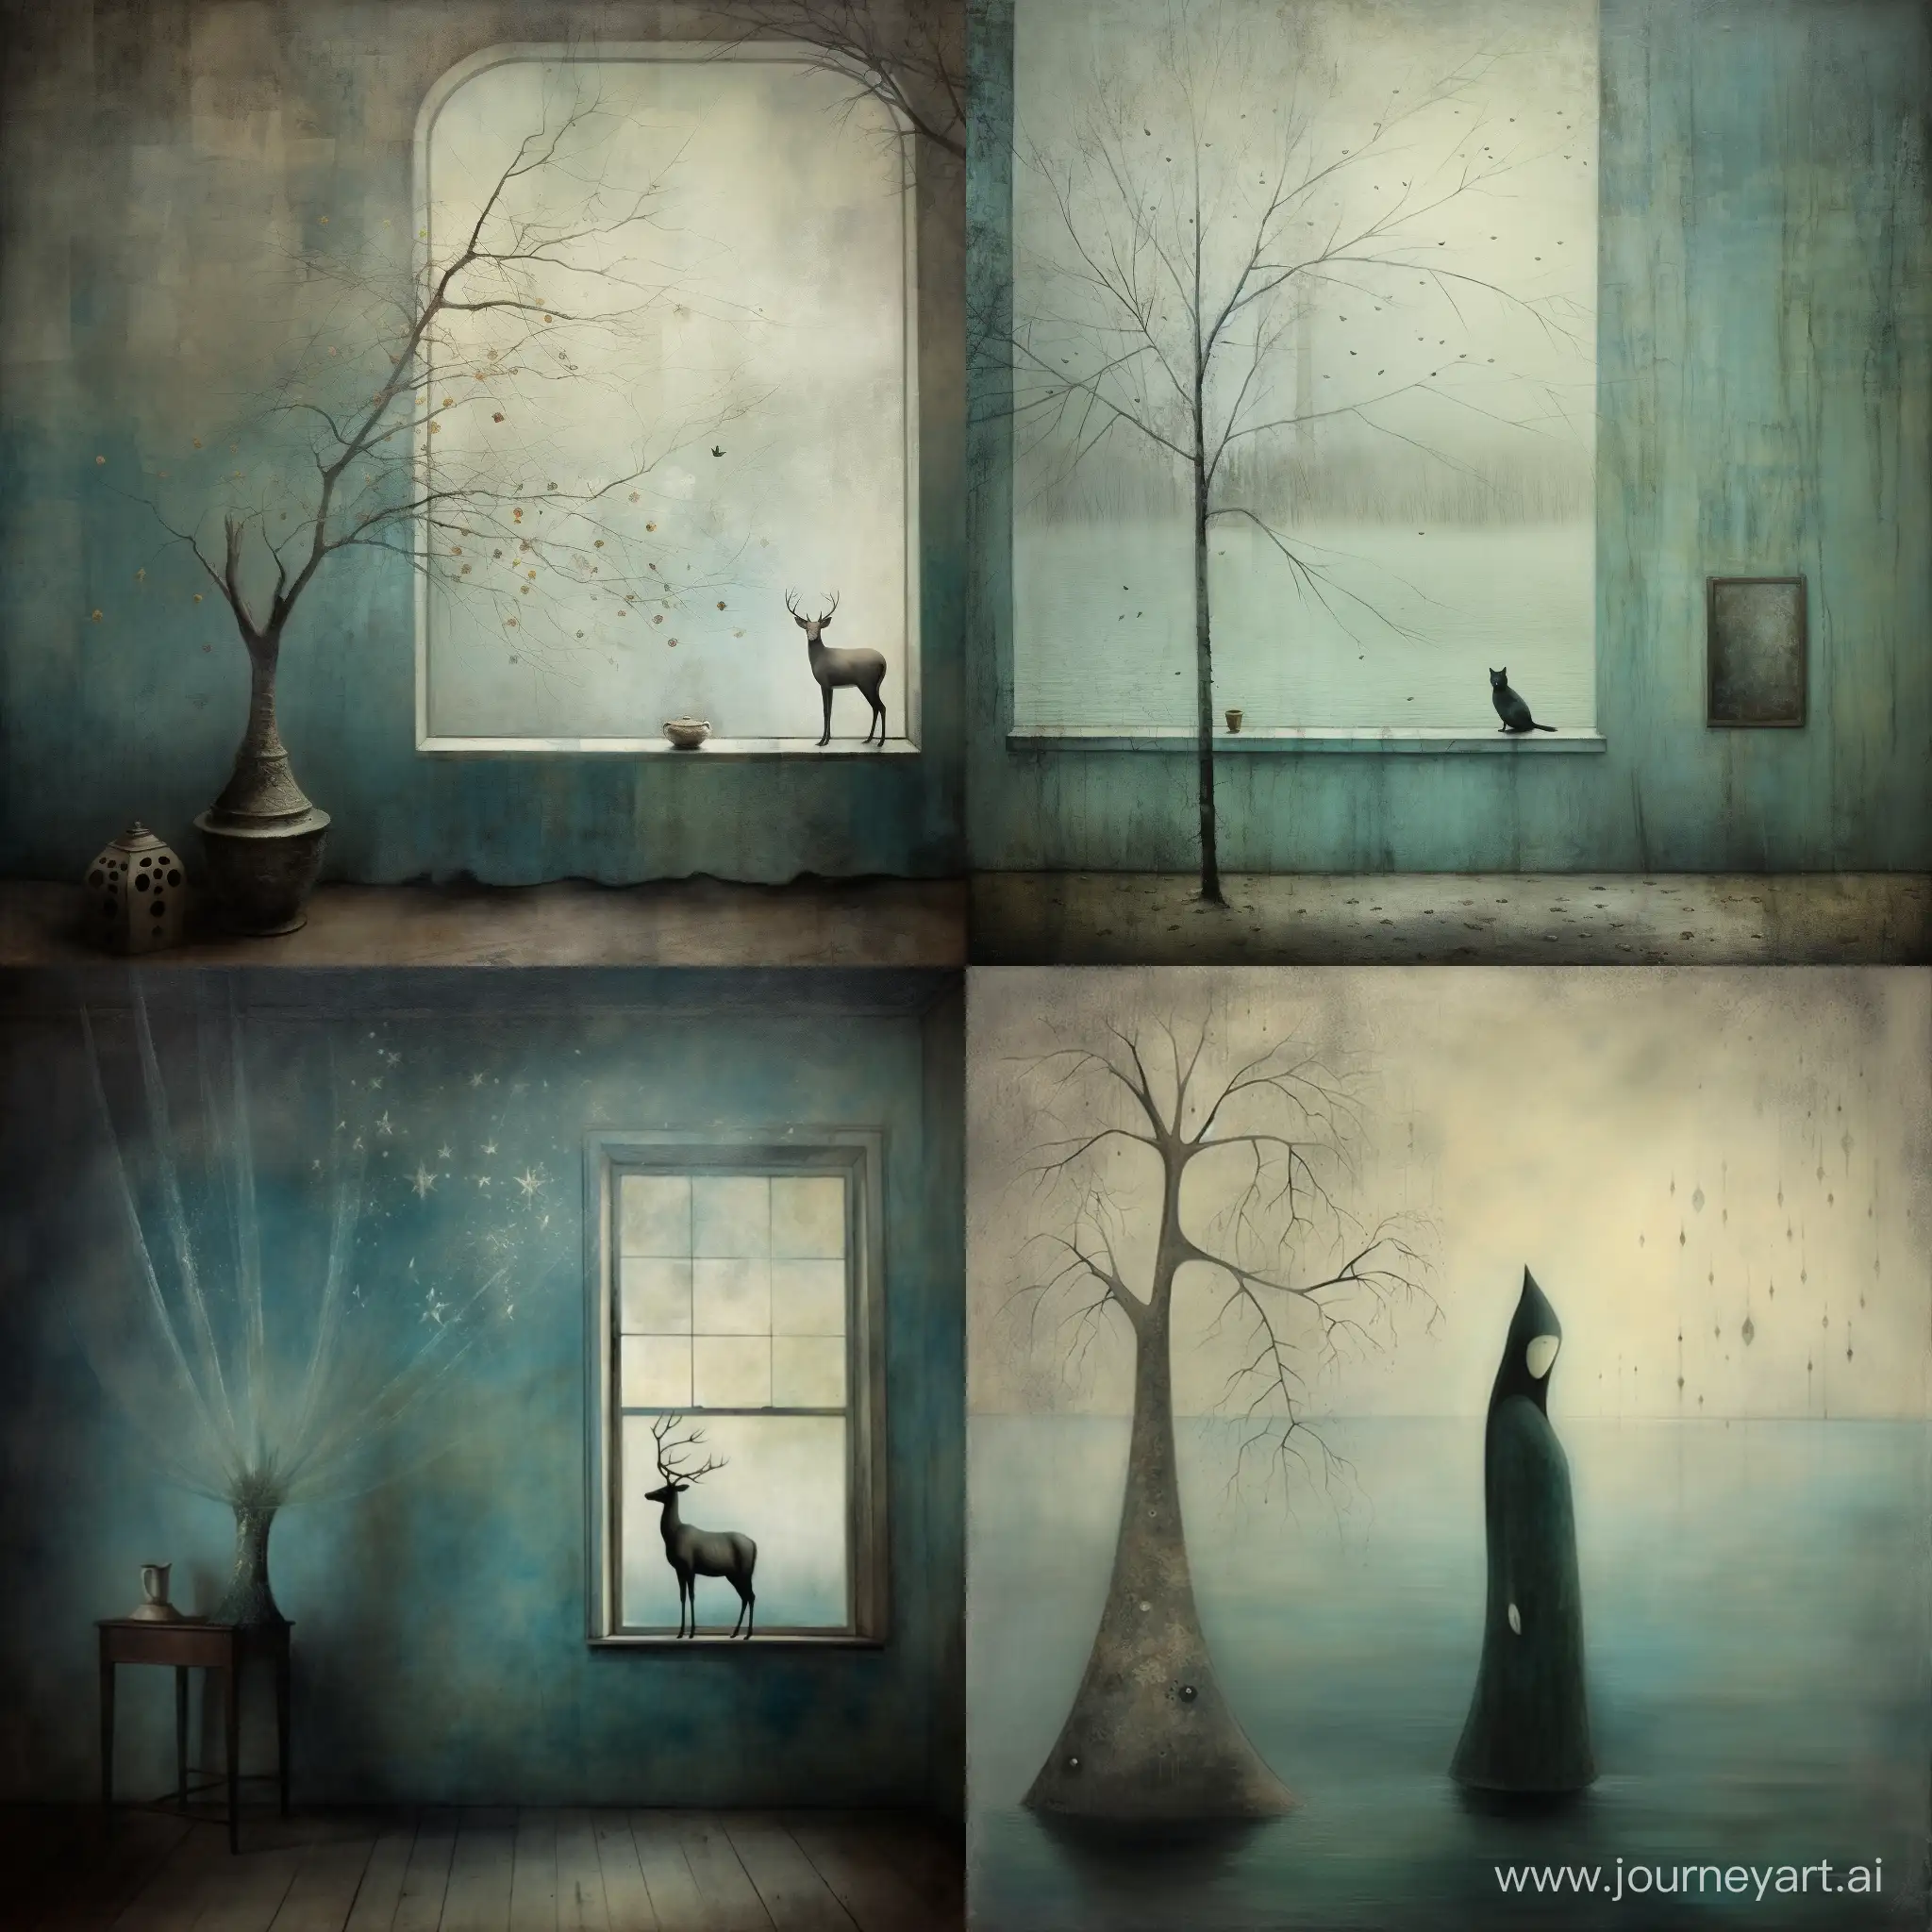 
whimsical FANTASY creature, in the style of enchanting surrealism, with hidden meanings, illusory images, jamie heiden, dark azure and aquamarine, texture-rich canvases, whimsical beauty, qajar art, raw art